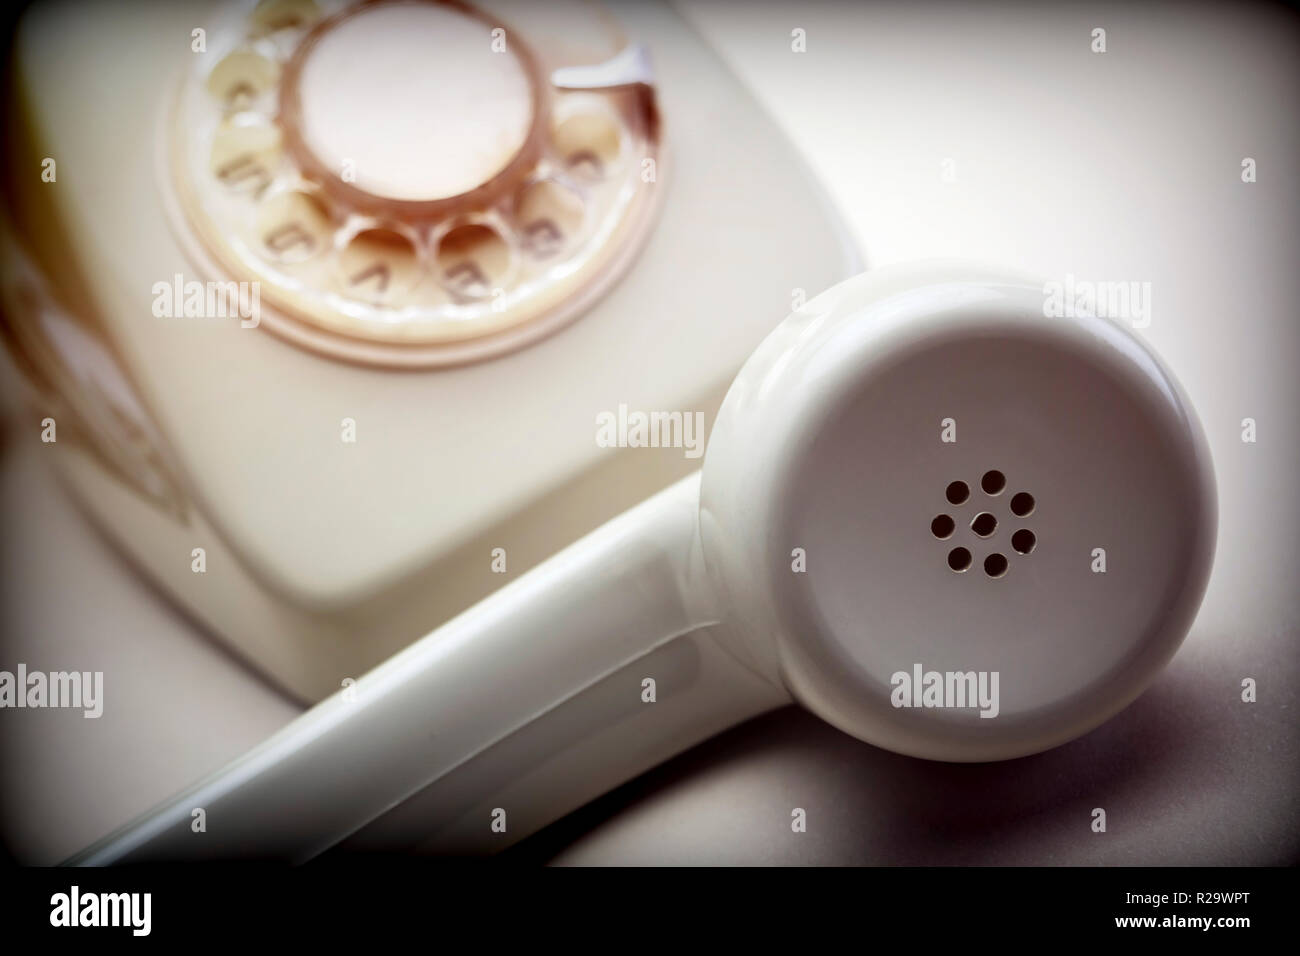 Vintage phone of years 60, conceptual image Stock Photo